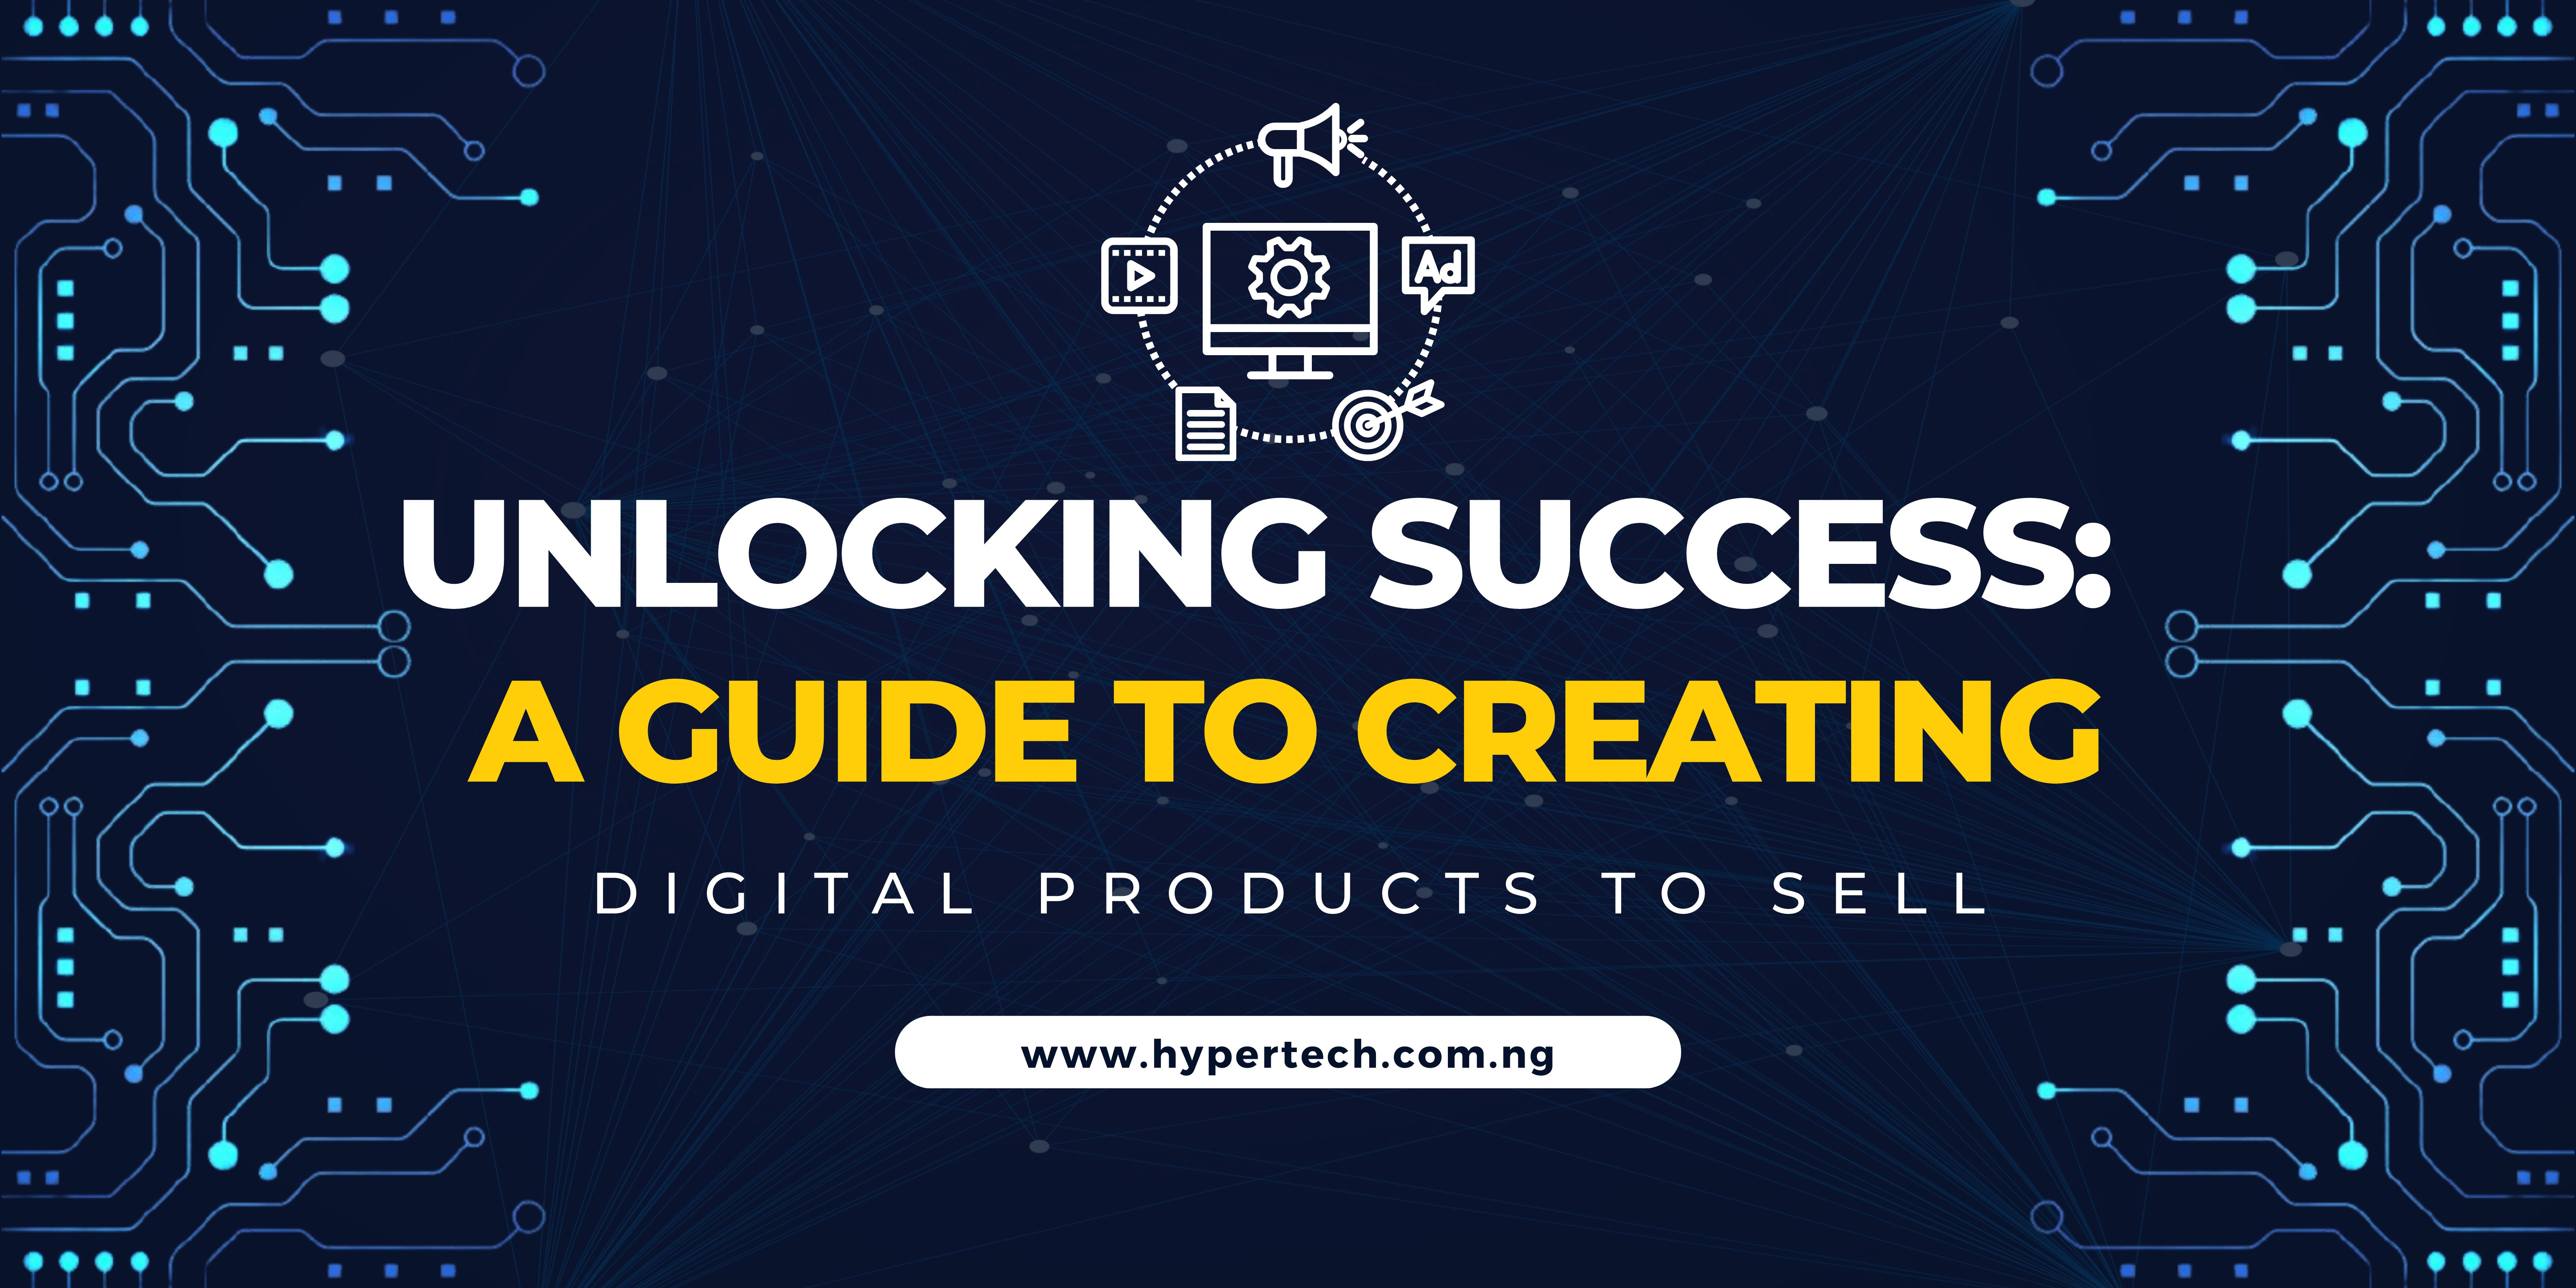 Creating Digital Products to Sell